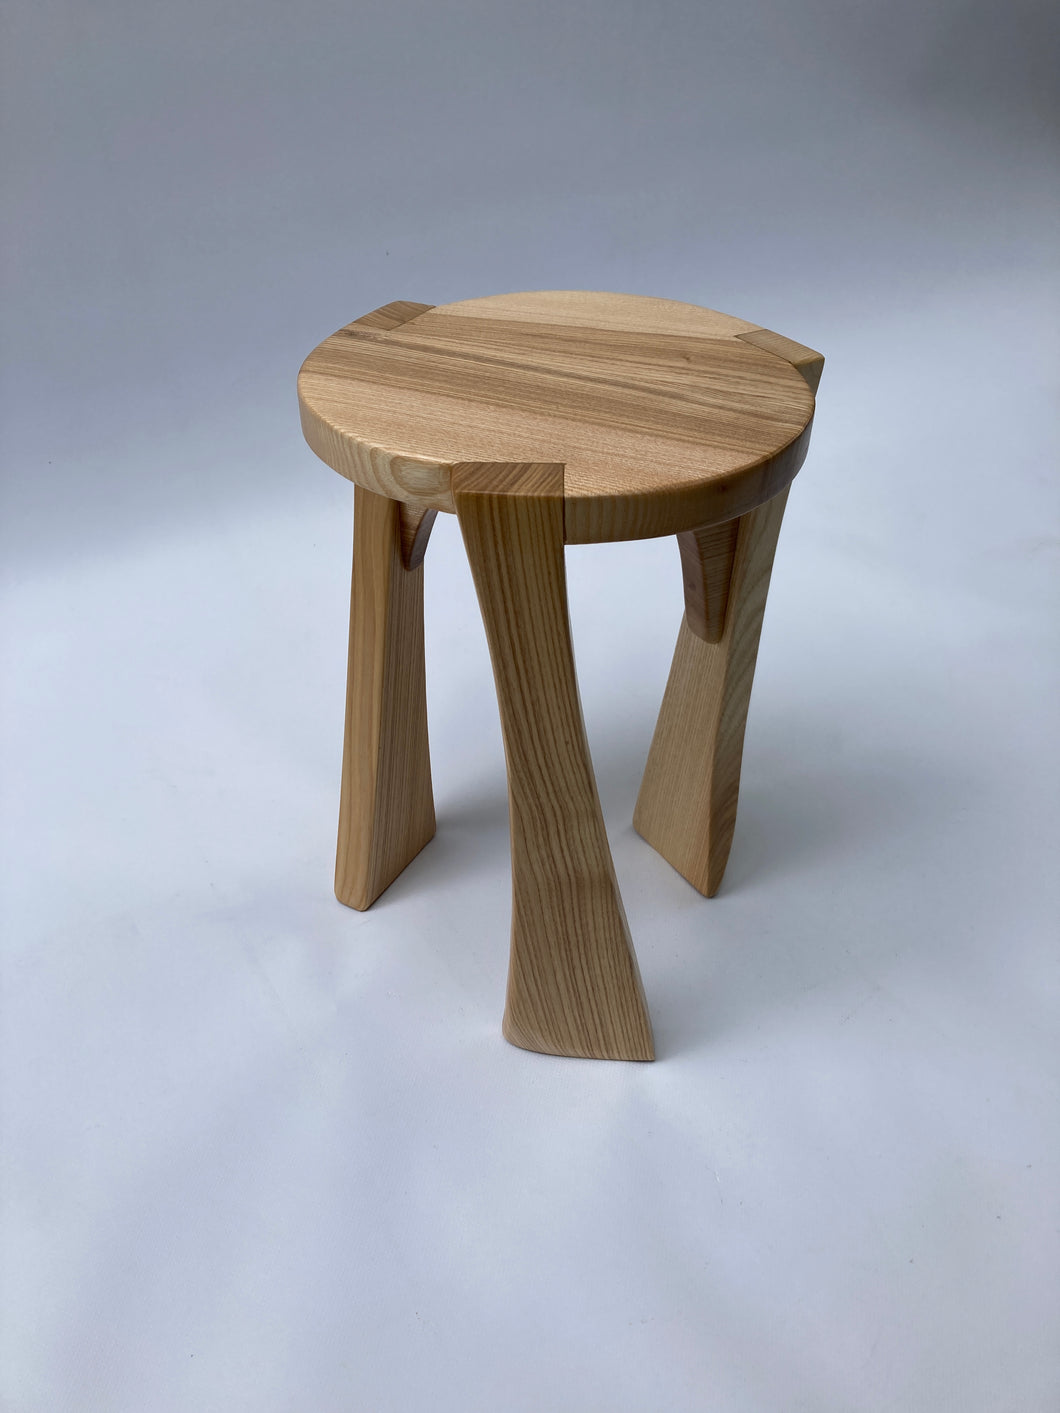 RO5NS5: Stool With A Twist (SOLD)